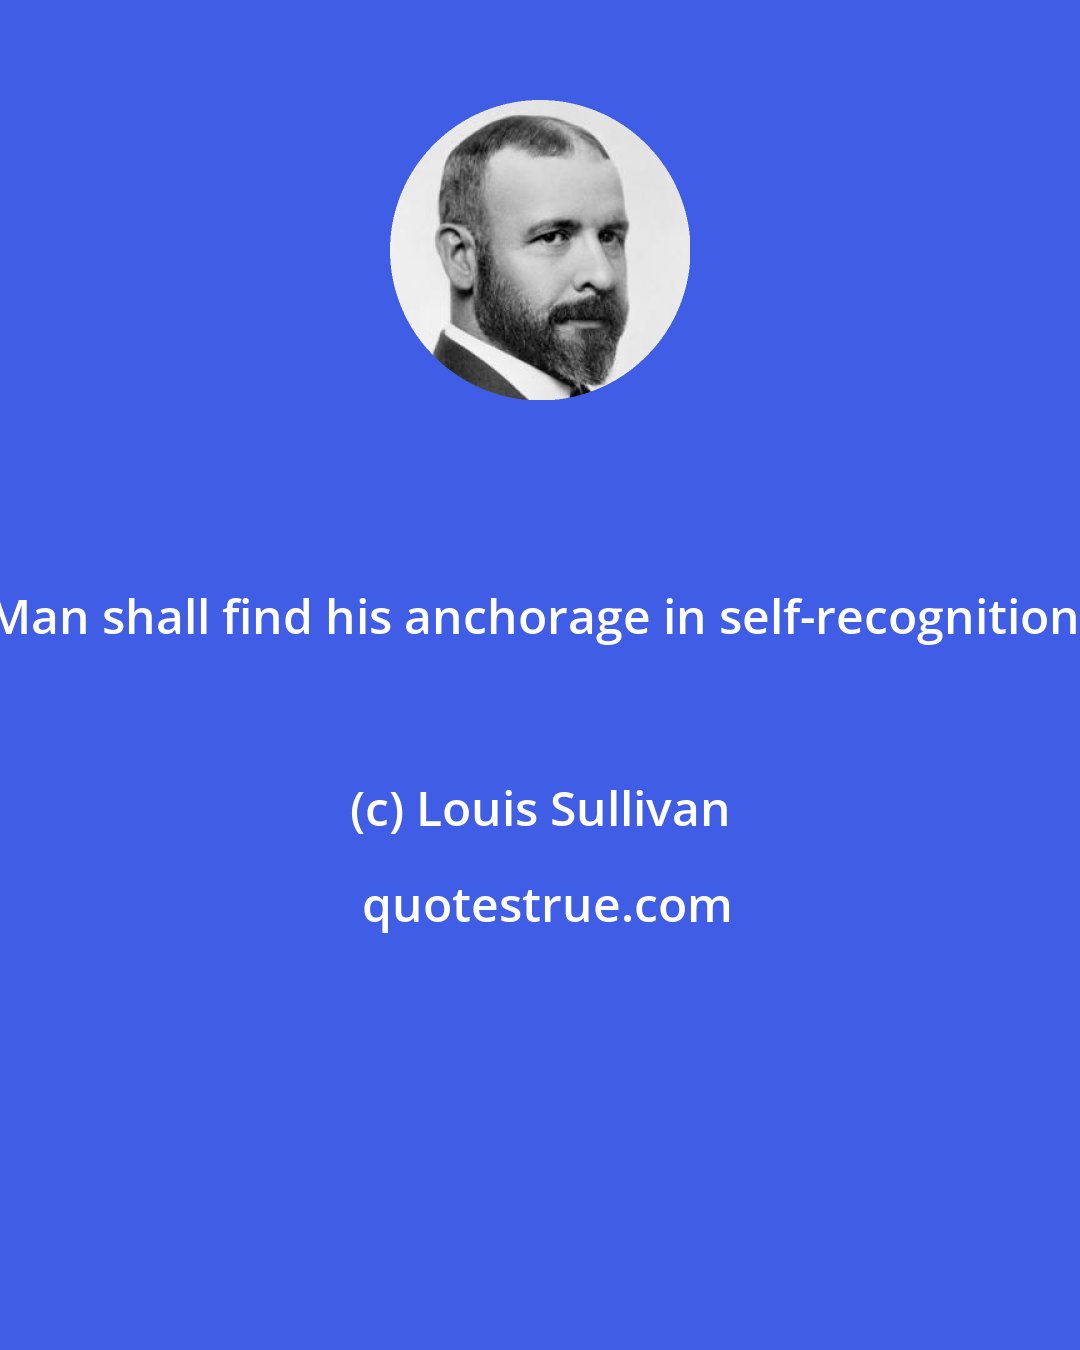 Louis Sullivan: Man shall find his anchorage in self-recognition.